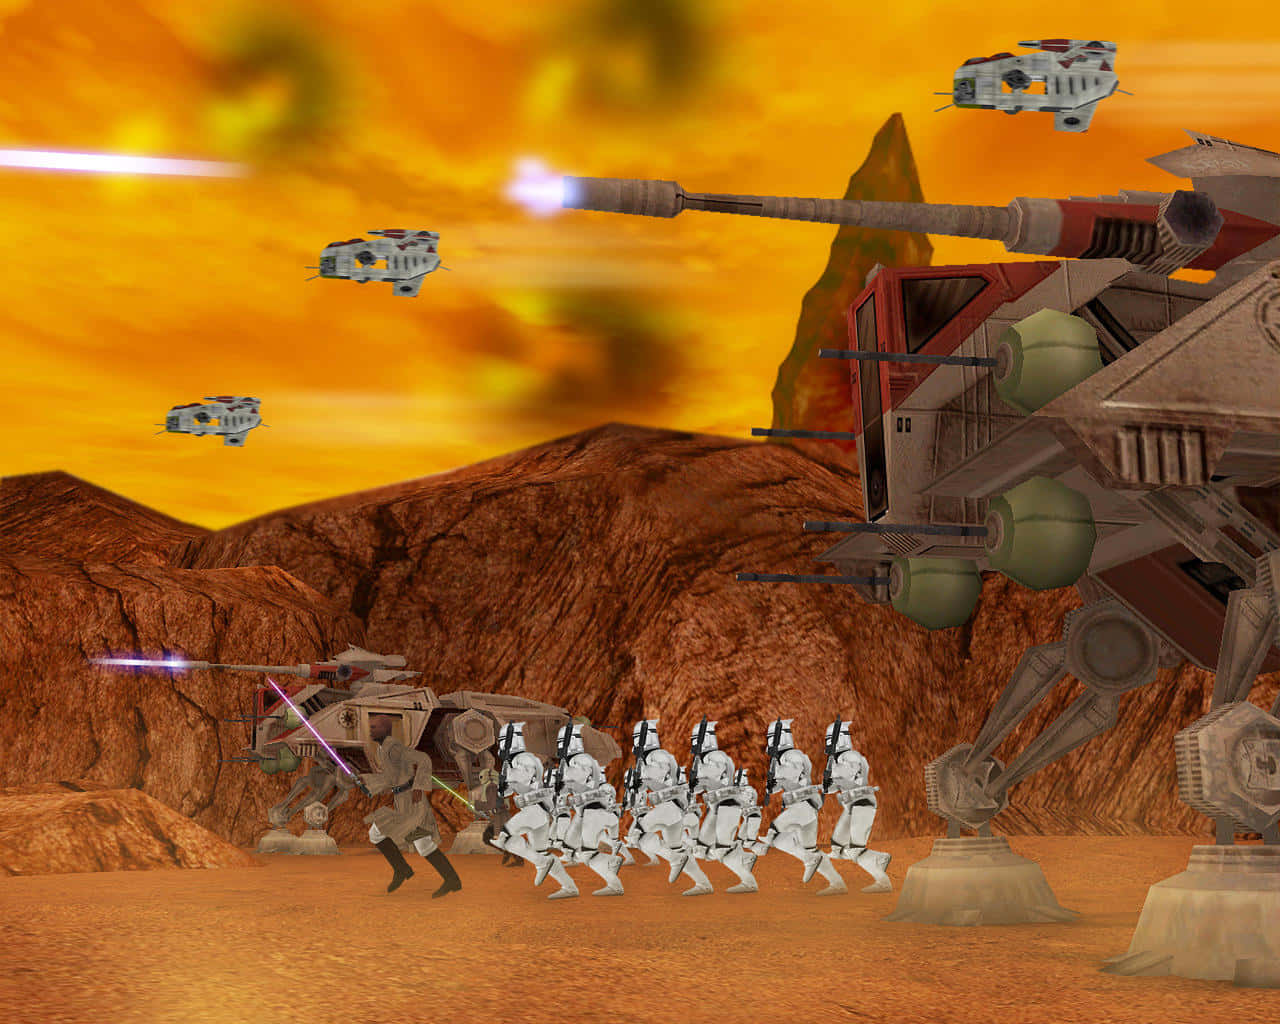 Epic Showdown at The Battle of Geonosis Wallpaper